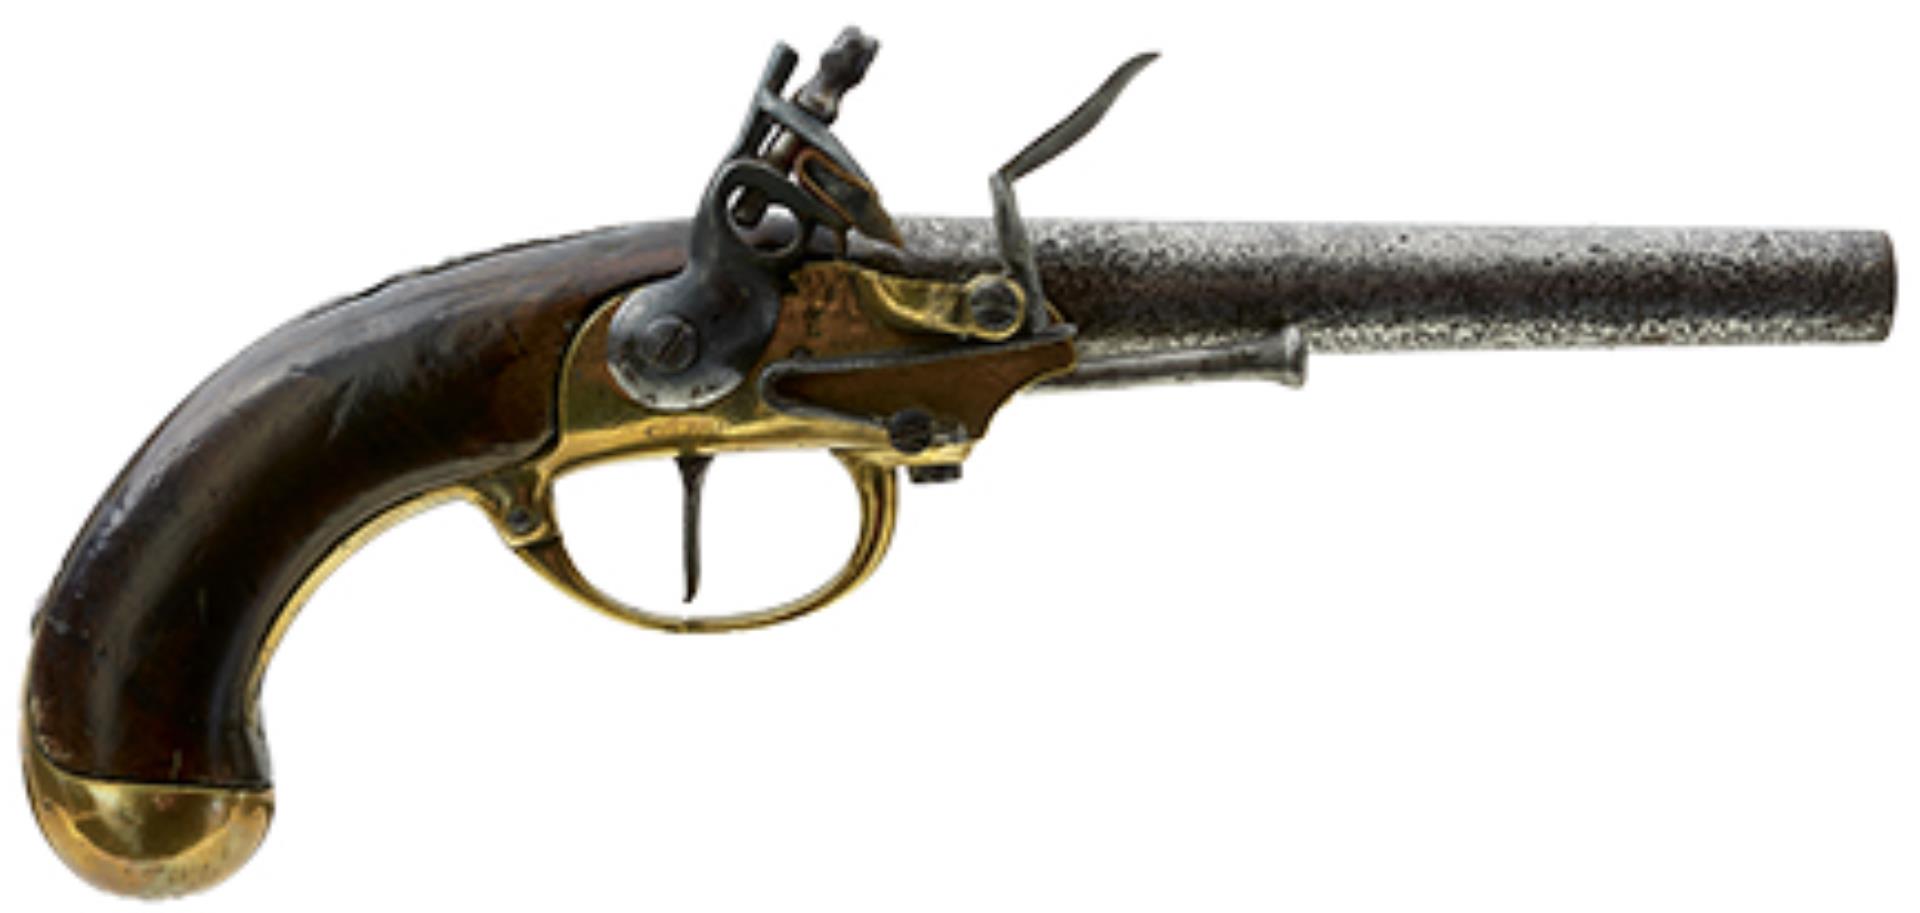 A .700 CALIBRE FRENCH FLINTLOCK MODEL 1777 CAVALRY PISTOL, 7.25inch barrel, the brass frame and